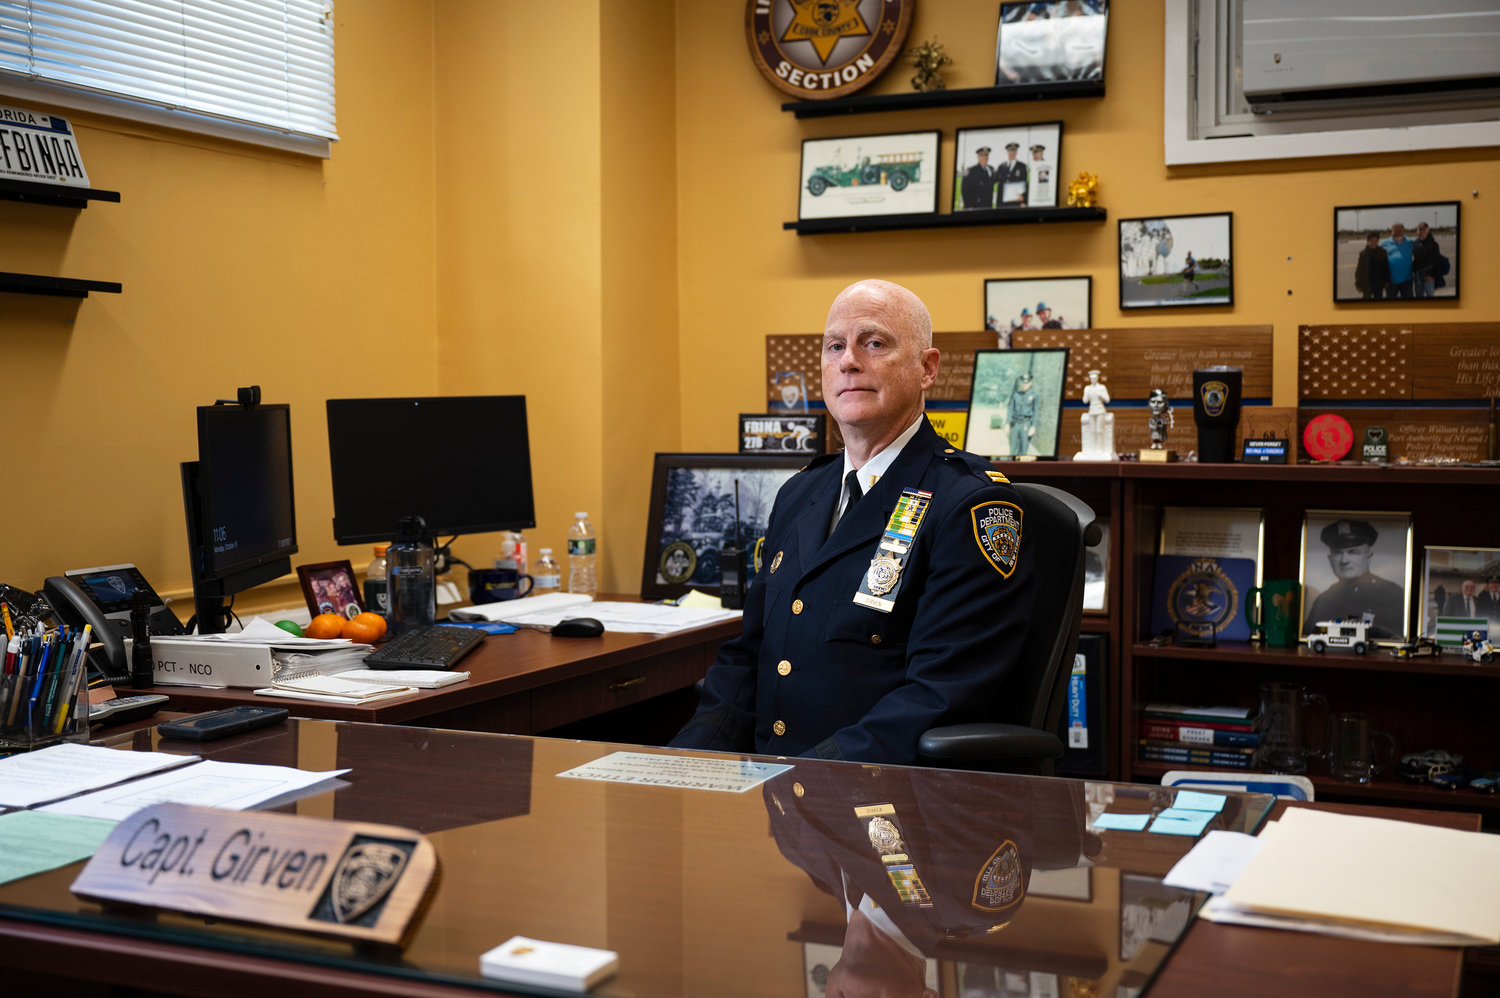 Capt. Charles Girven is the new commander of the New York Police Department’s 50th Precinct, taking over from the now-retired Emilio Melendez. Girven says he wants to continue Melendez’s work by tackling quality-of-life issues.